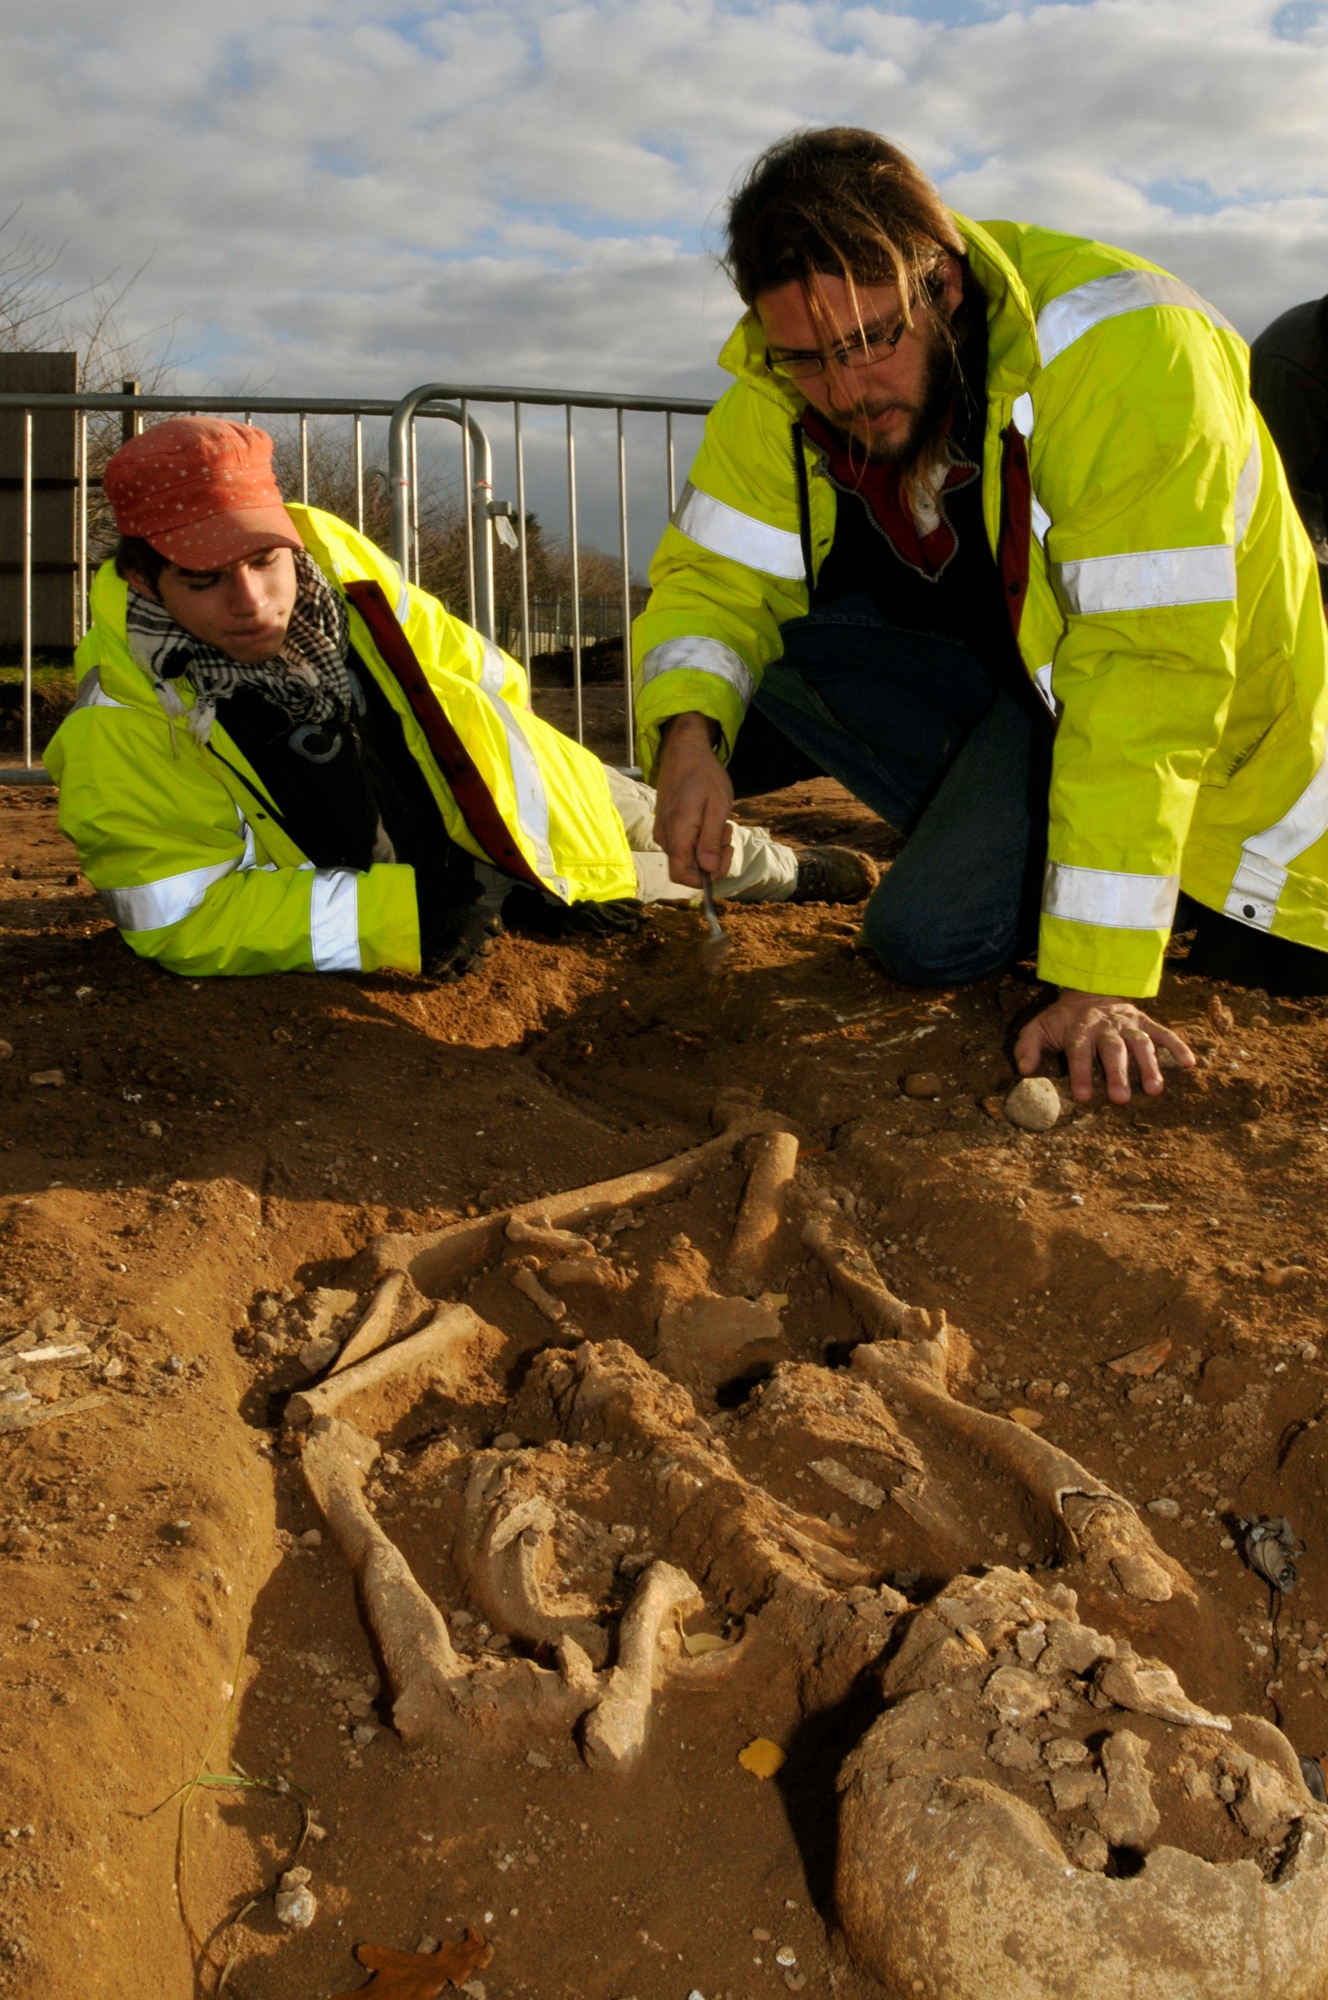 John Craven, gives Edman Frieser, both from the Suffolk County Council Archaeological Service, a few pointers on removing the sediment away from the remains of 2,000 year old skeleton Nov 24 at RAF Lakenheath, England. The archaeologist tries their best to keep the bones intact since the skull has already been destroyed by farming equipment. (U.S. Air Force photo by Airman 1st Class Perry Aston) 